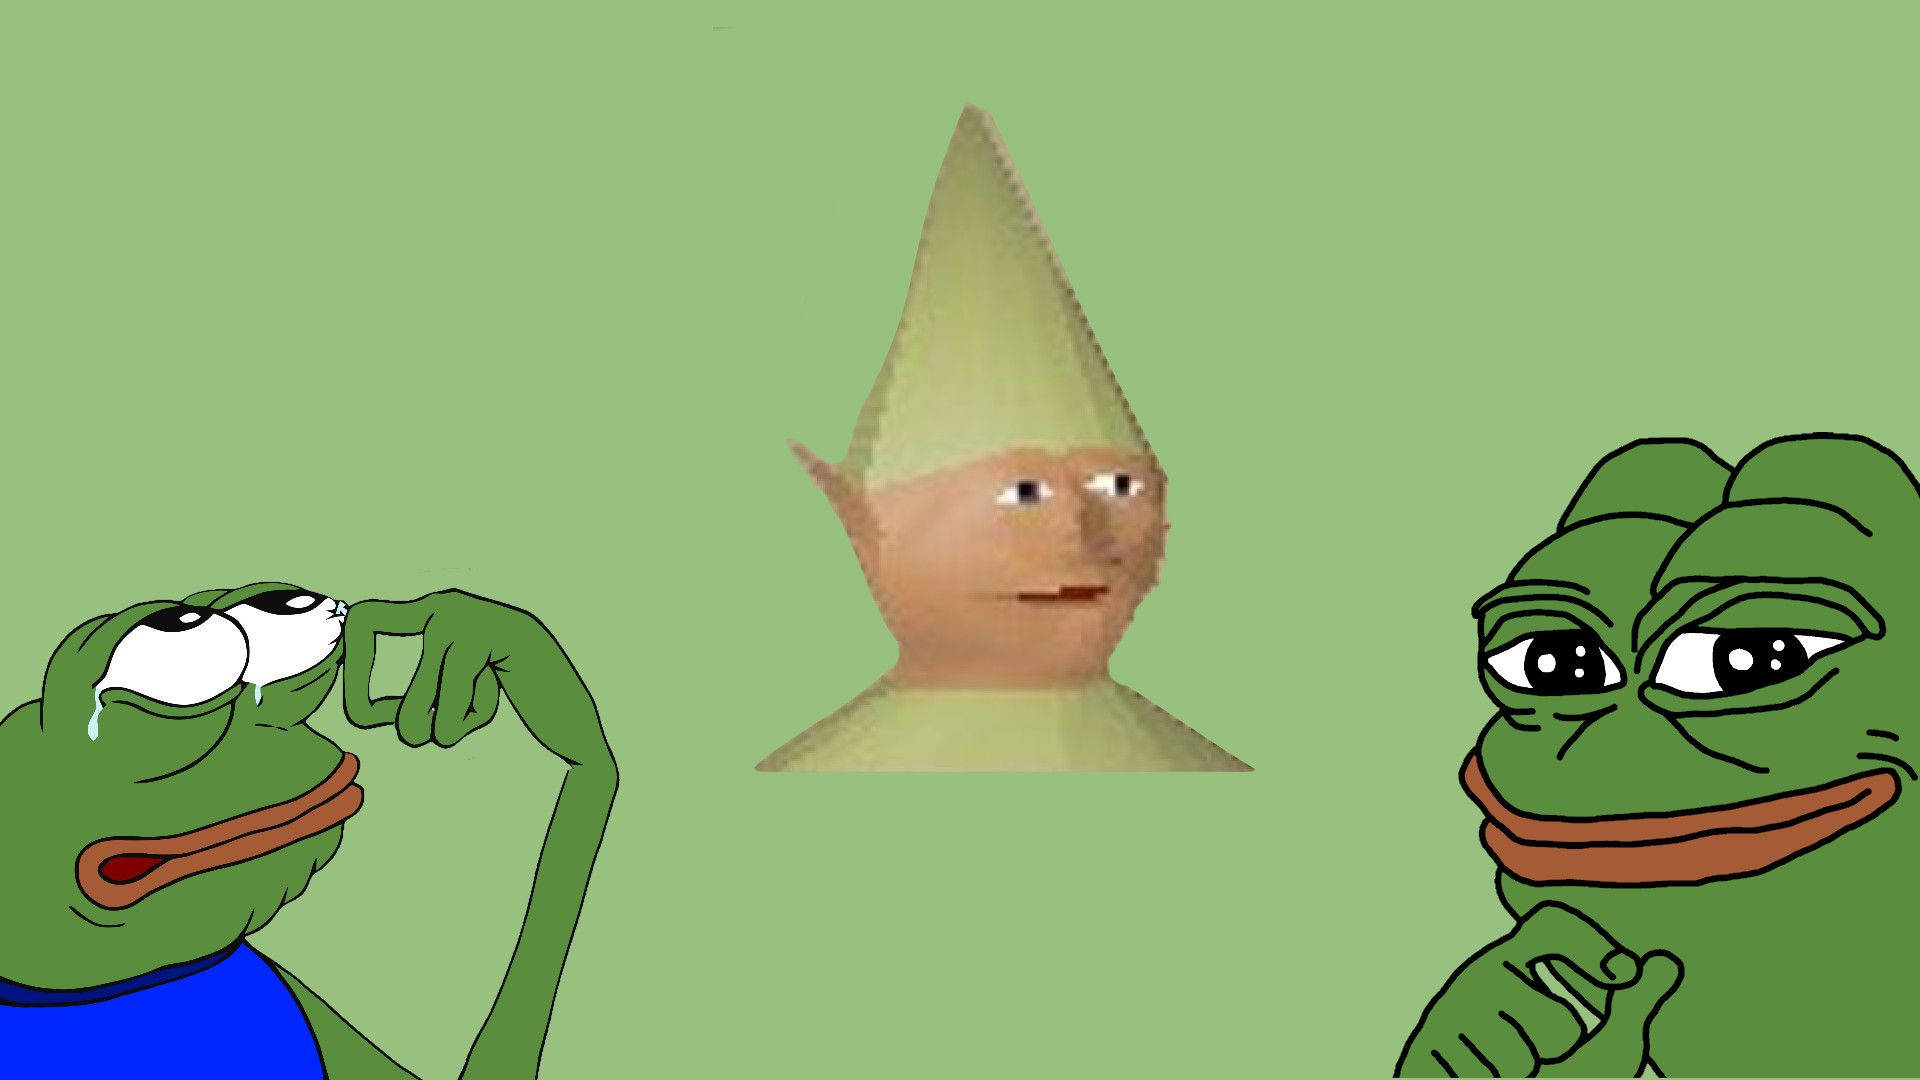 Gnome Child And Pepe The Frog Meme Wallpaper